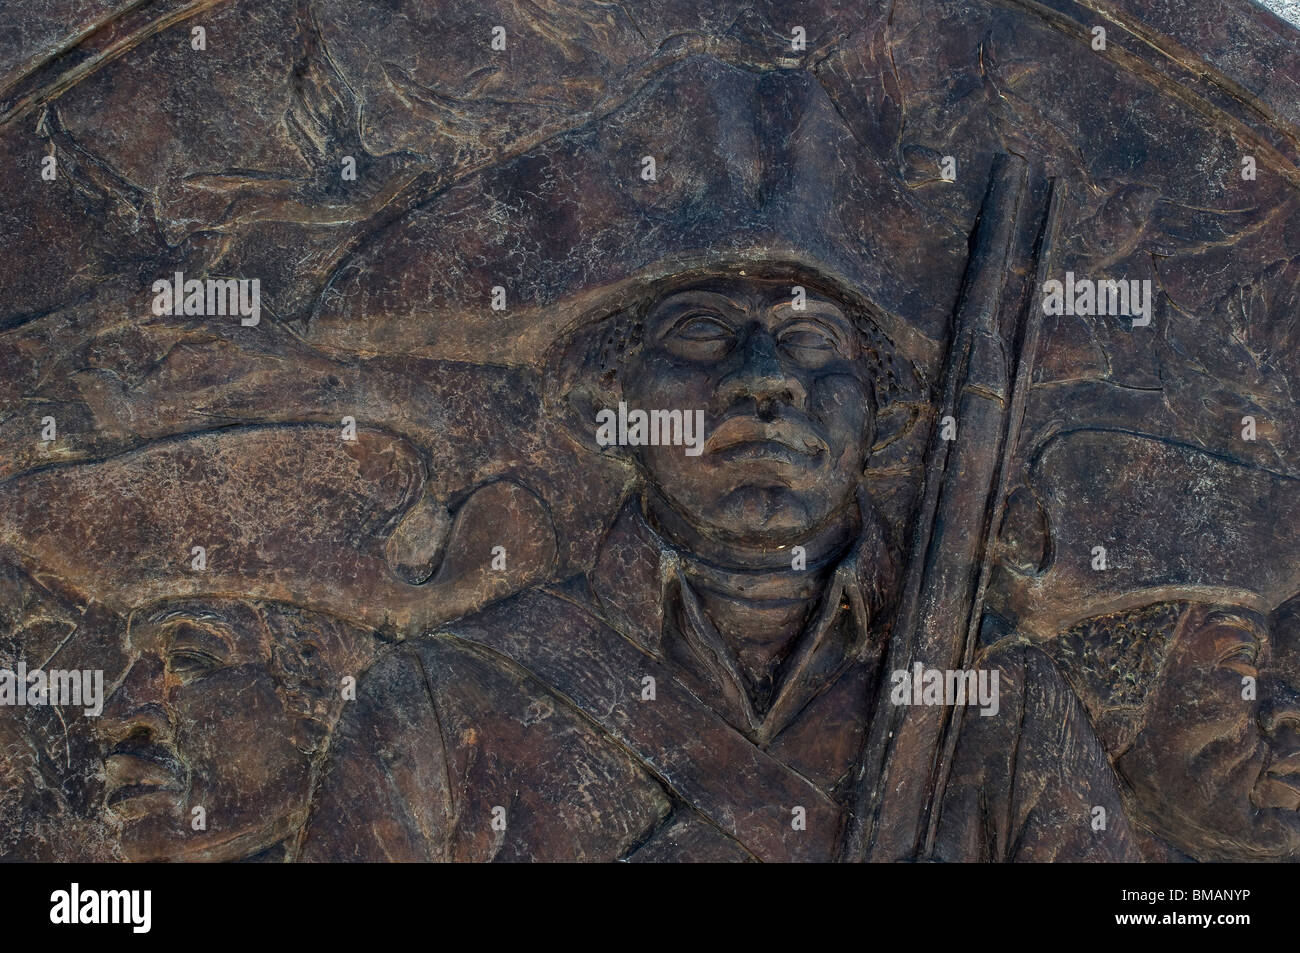 African-American Revolutionary War soldier memorial at Valley Forge, Pennsylvania. Digital photograph Stock Photo